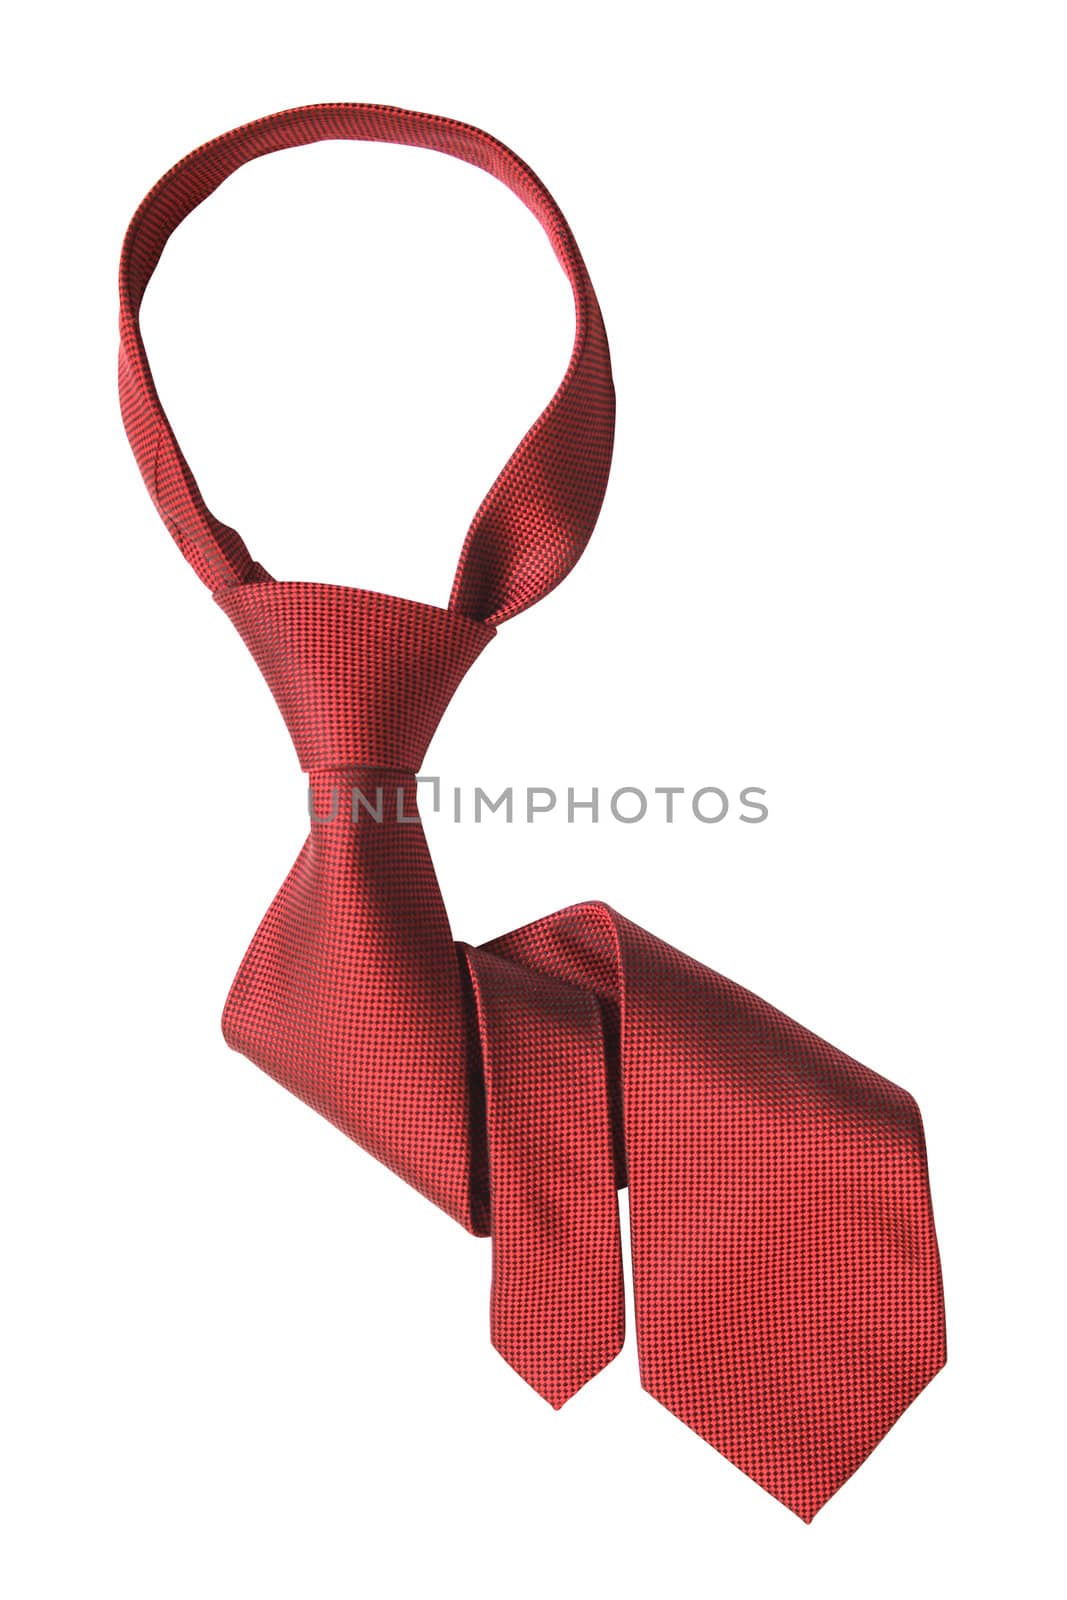 Red necktie isolated on white background with clipping path